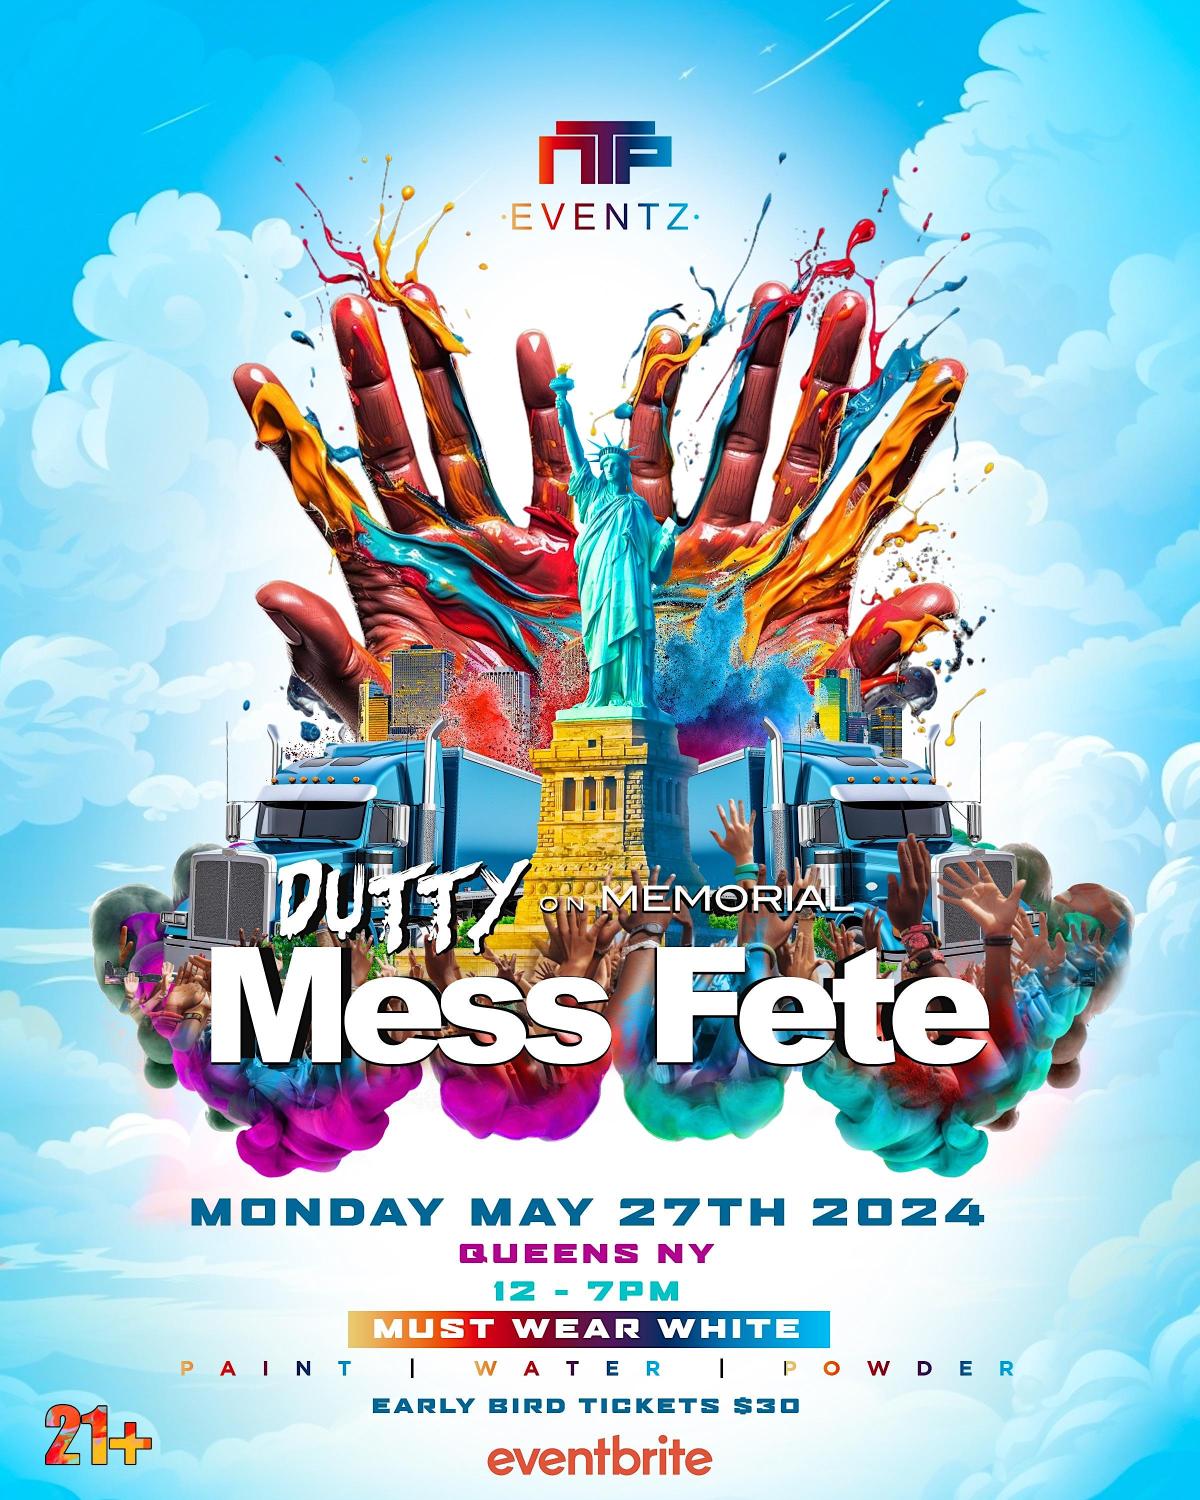 Mess Fete flyer or graphic.